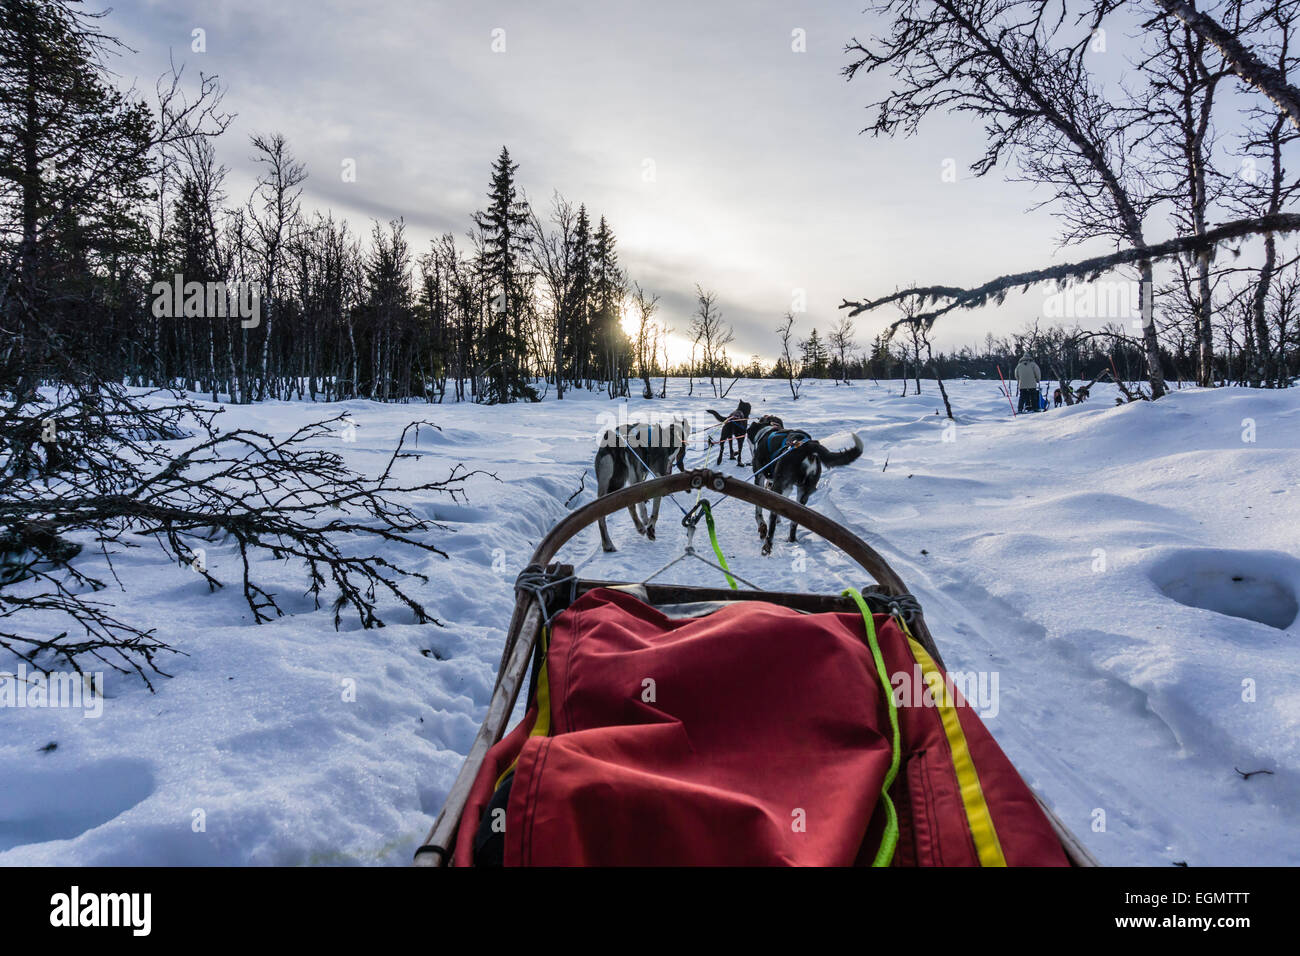 First person view from a dog sled pulled by huskies traveling through the snow in Geilo, Norway. Stock Photo